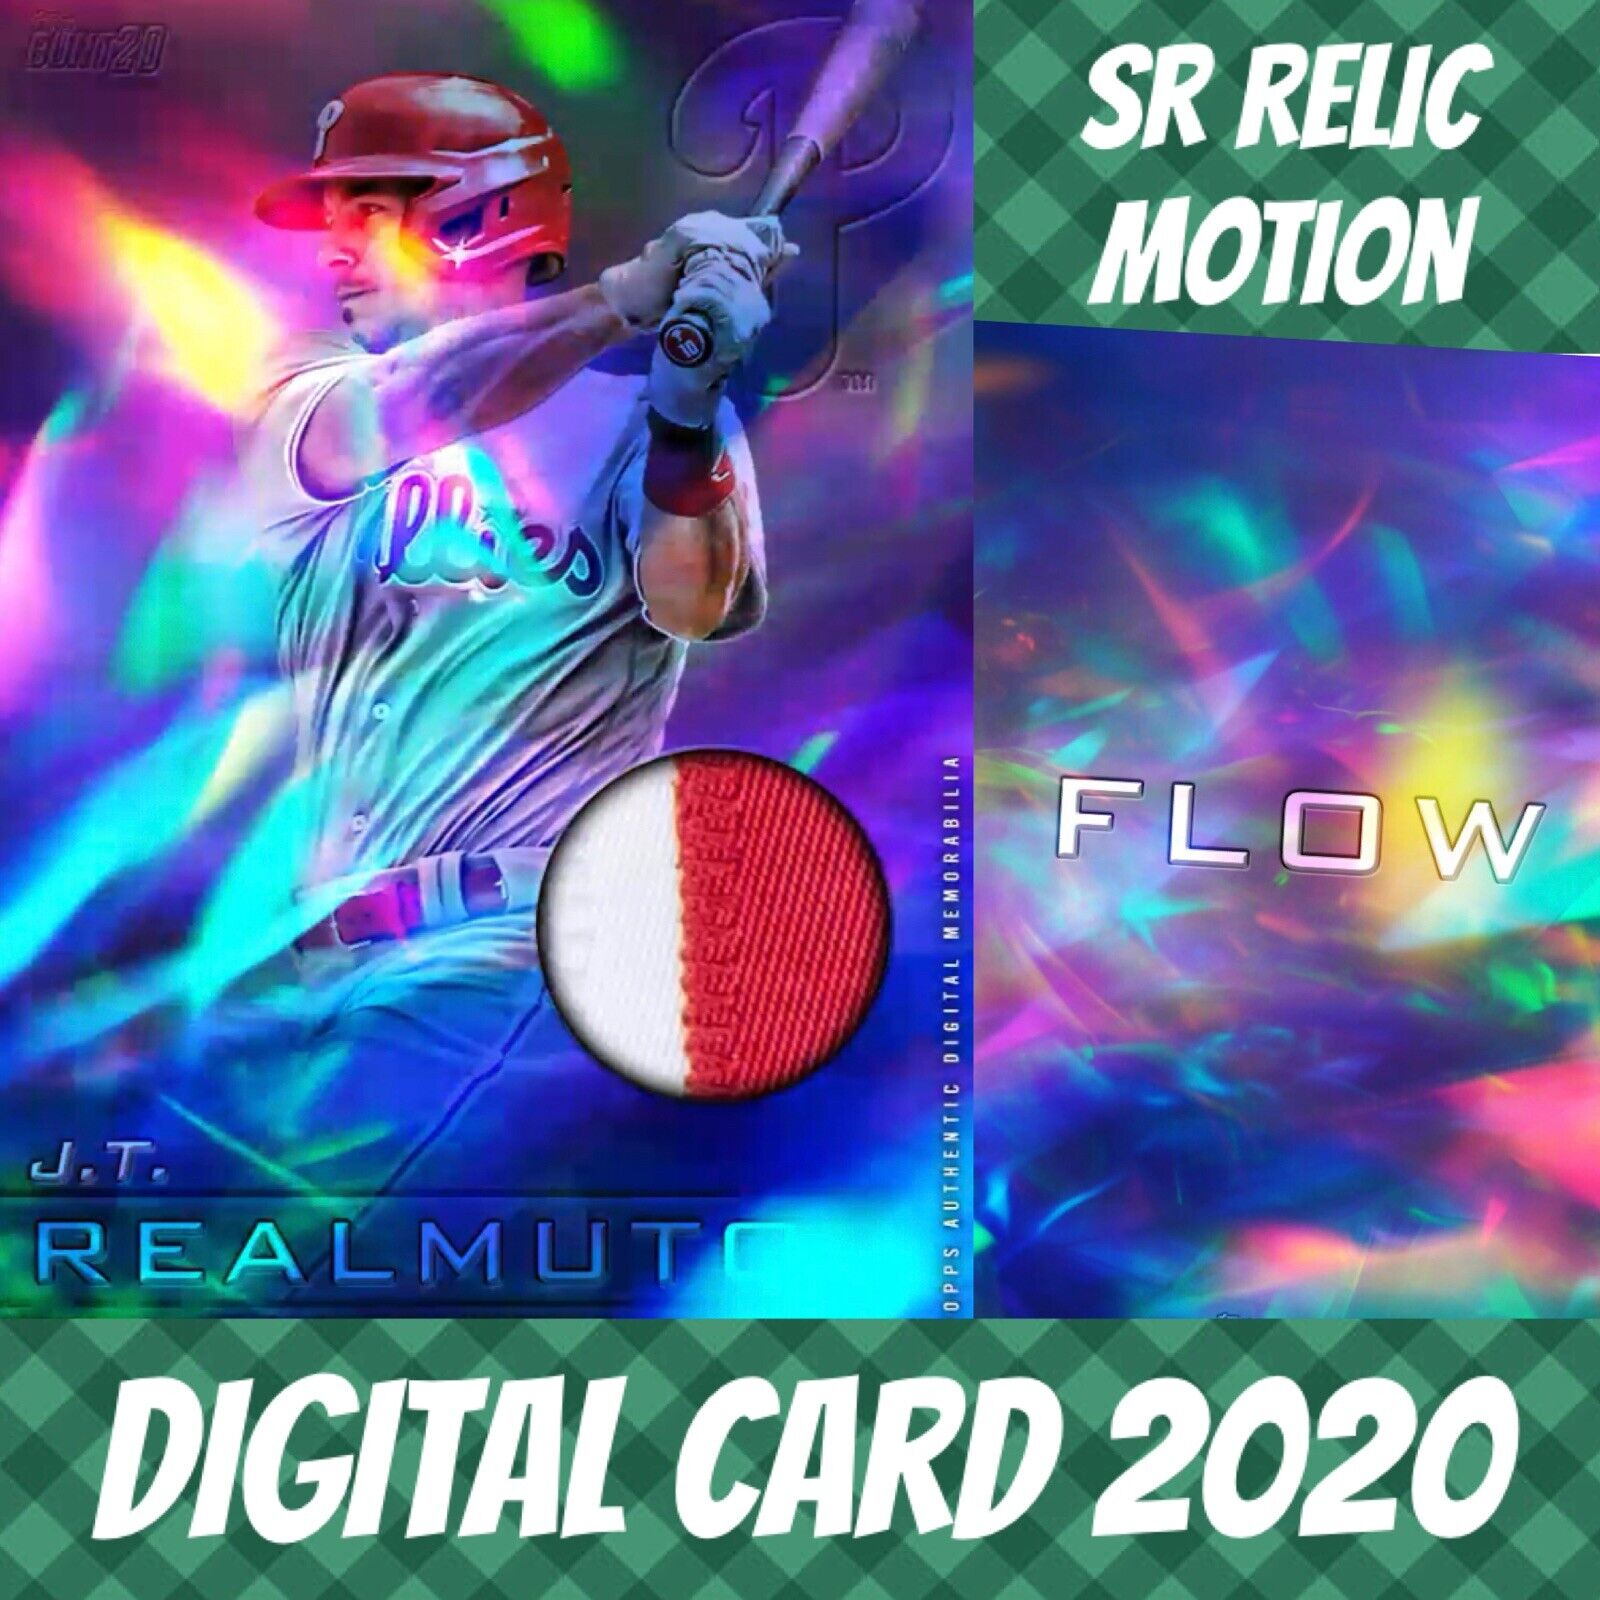 Topps Colorful sr j.t. 2020 Realmuto Flow Motion Rainbow Relic Digital Card